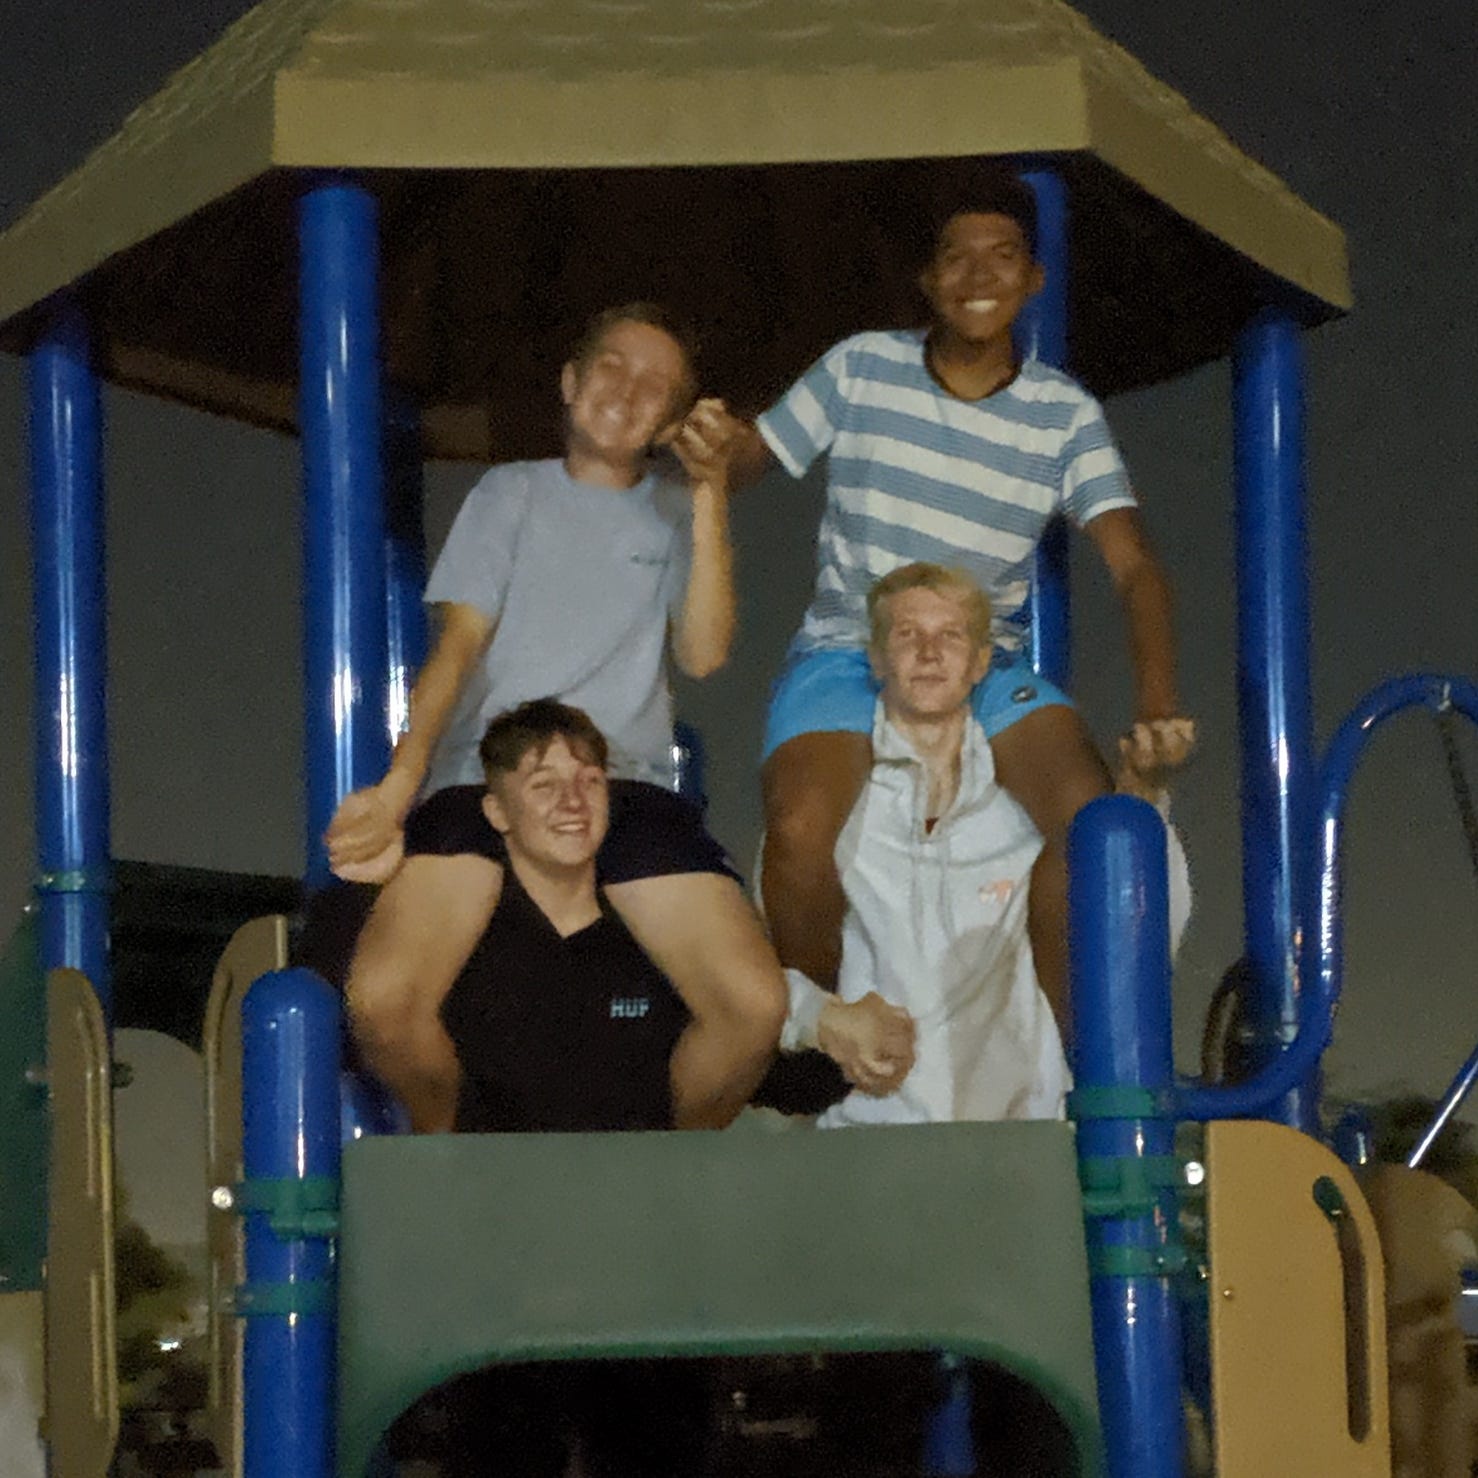 An October, 2019 photo shows Jacob Ivascu and Sergio Campusano sitting on the shoulders of Drake Ruiz and Daniel Hawkins during a youth event organized by Northpoint Evangelical Free Church of Corona